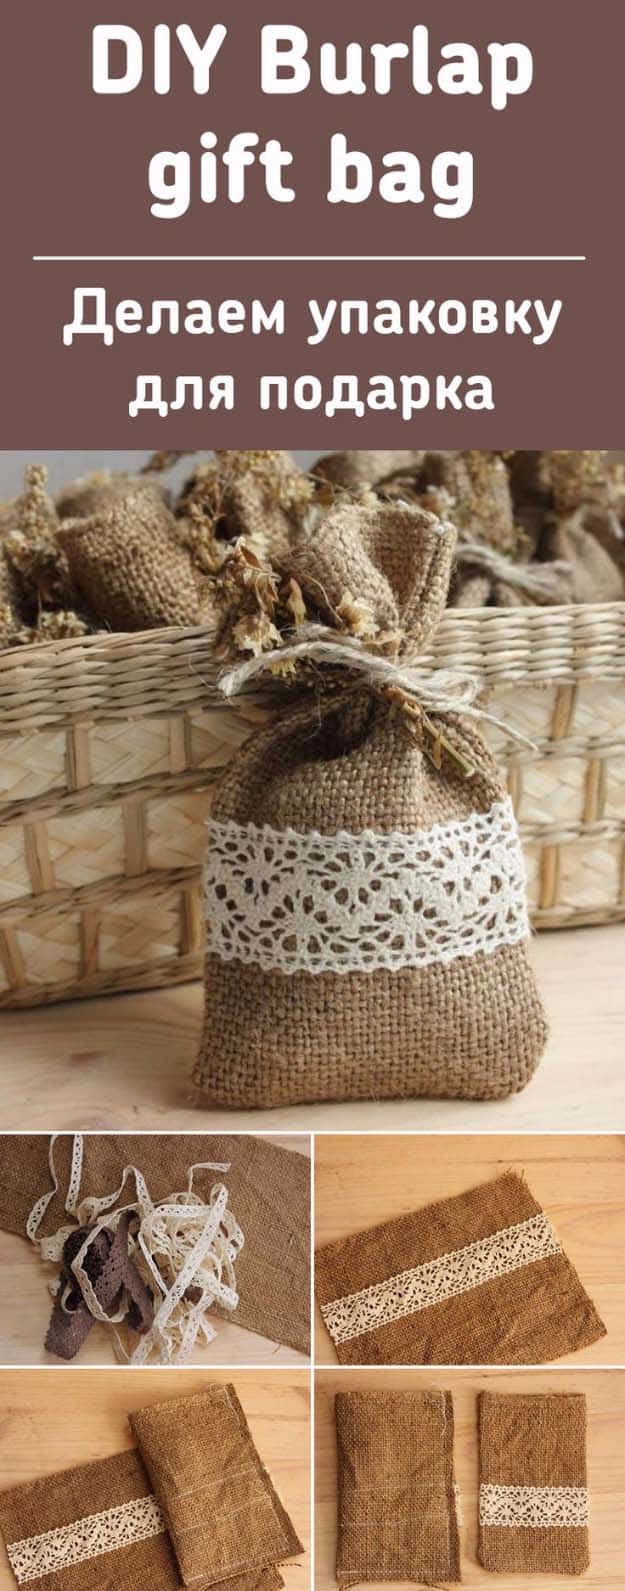 DIY Projects with Burlap and Creative Burlap Crafts for Home Decor, Gifts and More | Burlap Gift Bag 